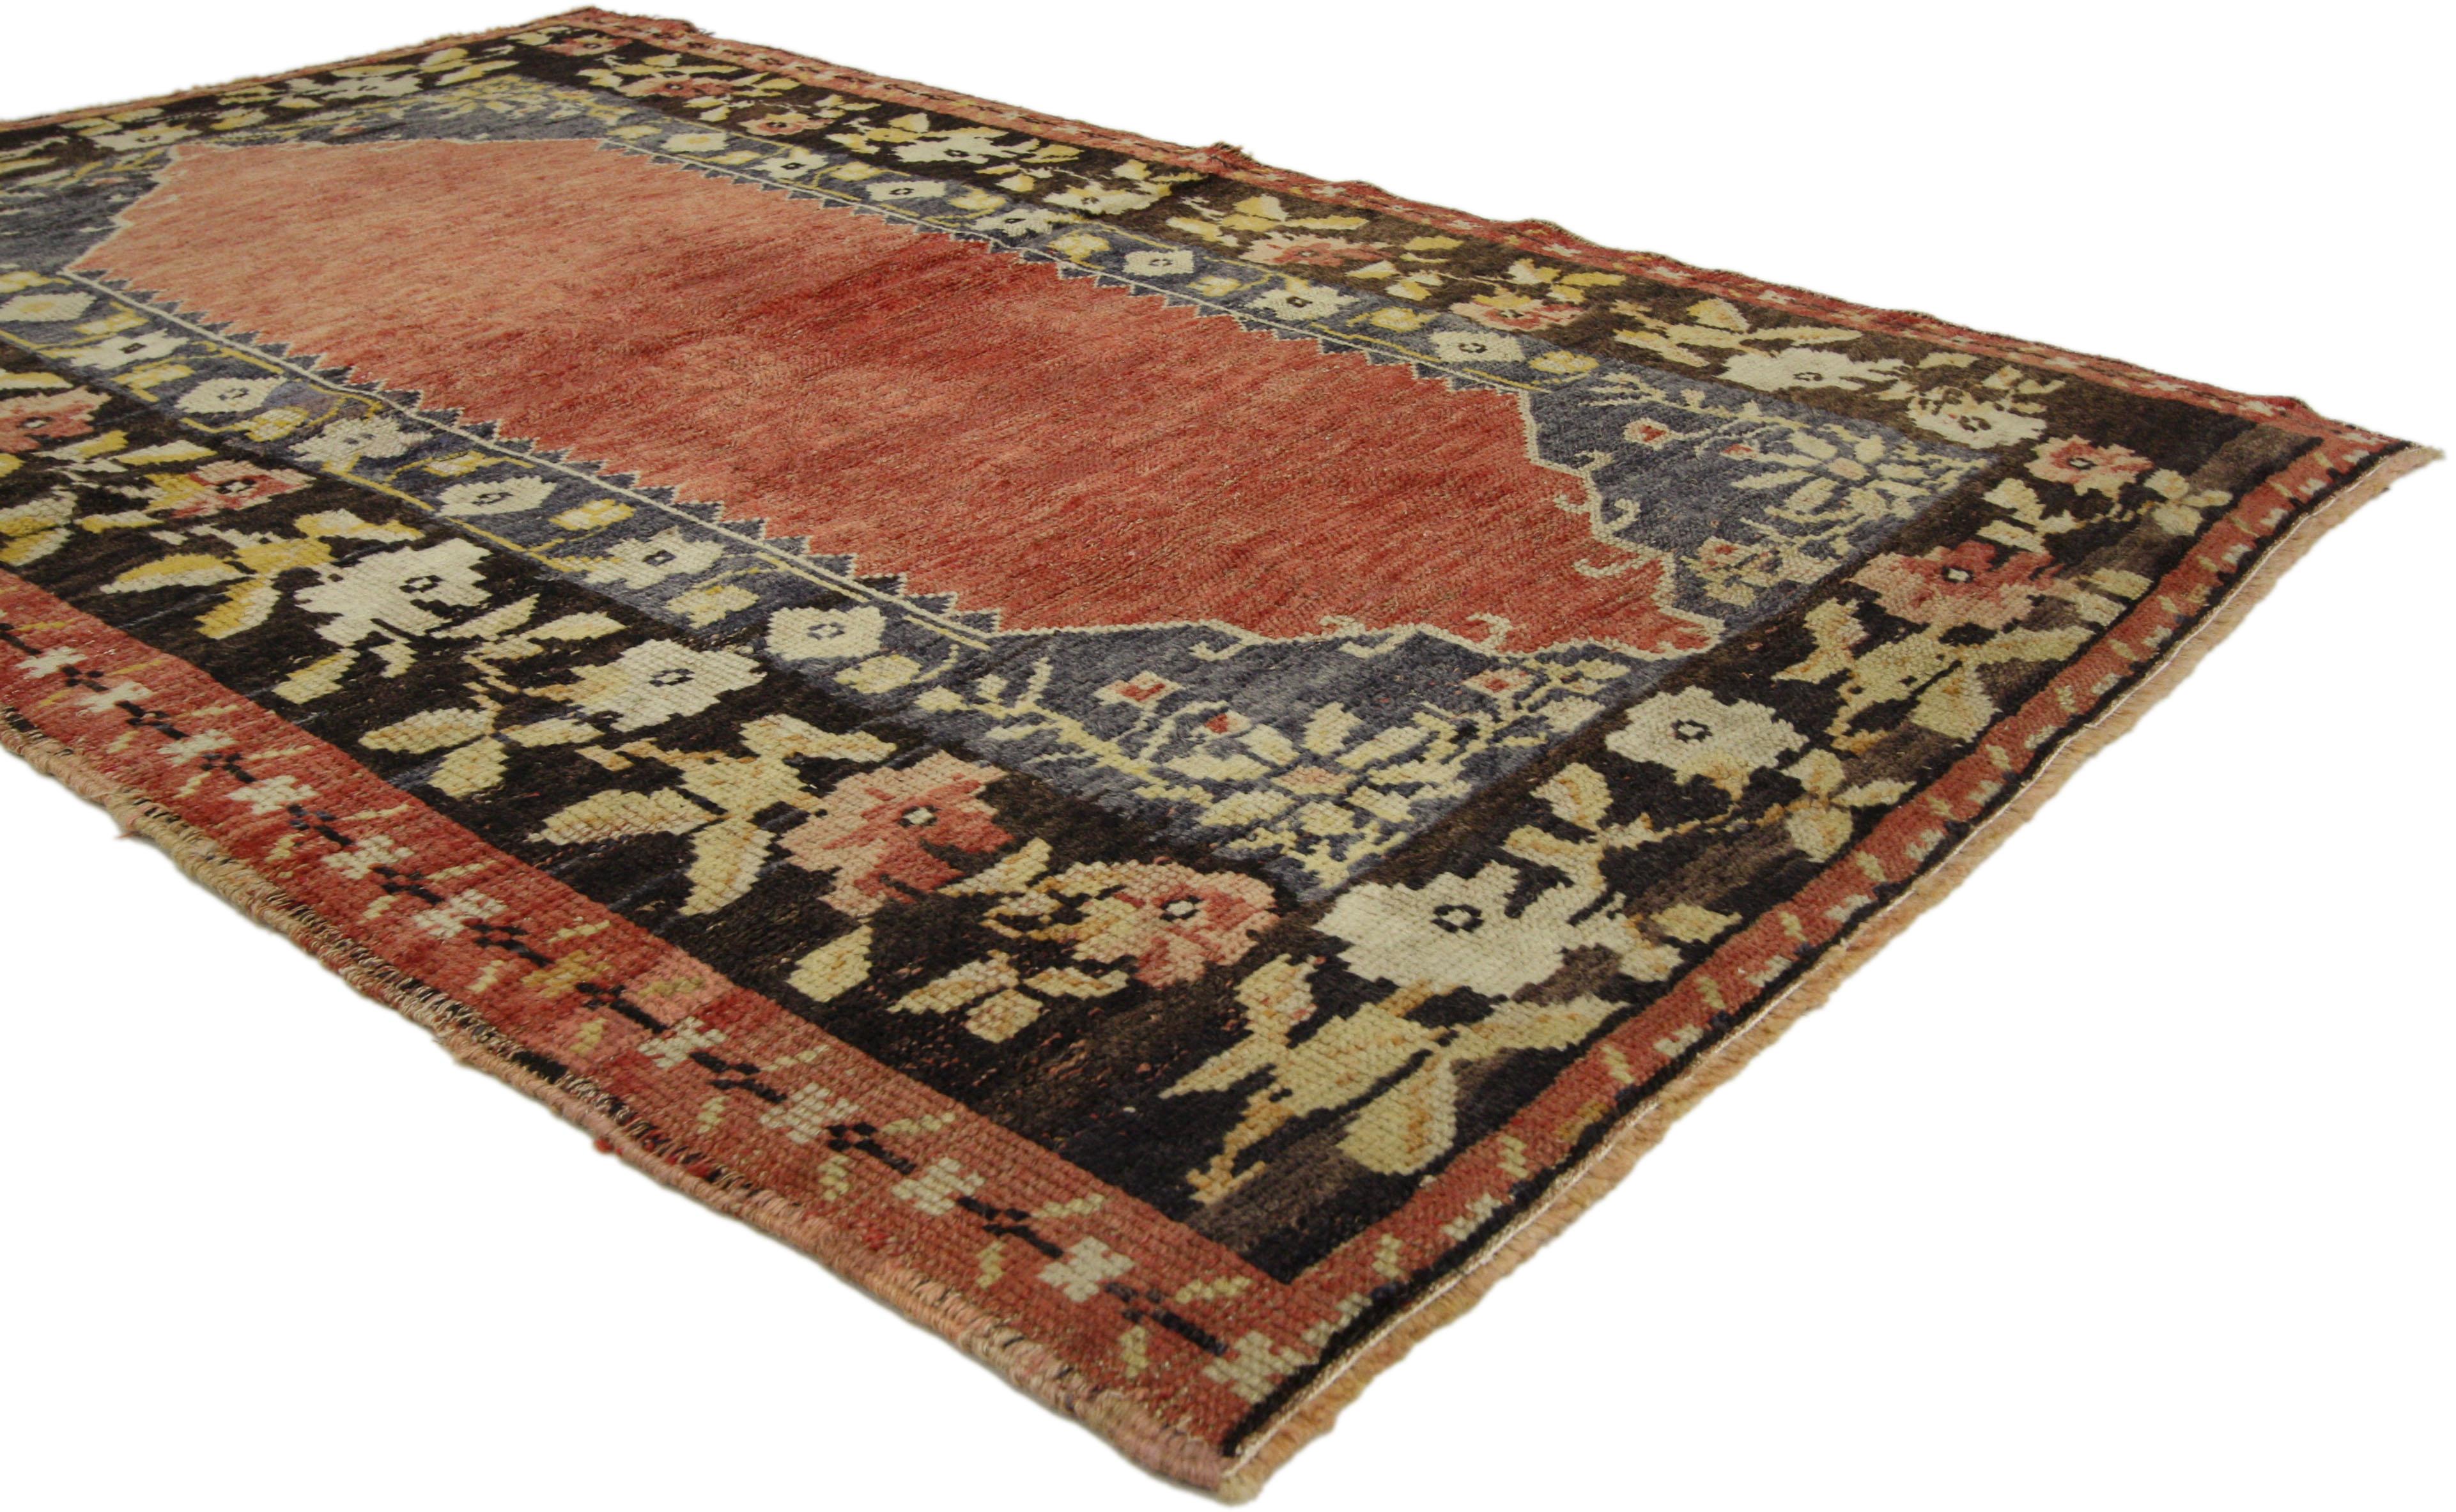 50309, Vintage Turkish Oushak Rug with Rustic Farmhouse Style 03'05 x 05'03. Warm and inviting with bucolic charm, this hand-knotted wool vintage Turkish Oushak rug beautifully embodies a rustic farmhouse style. The open brick red features a double